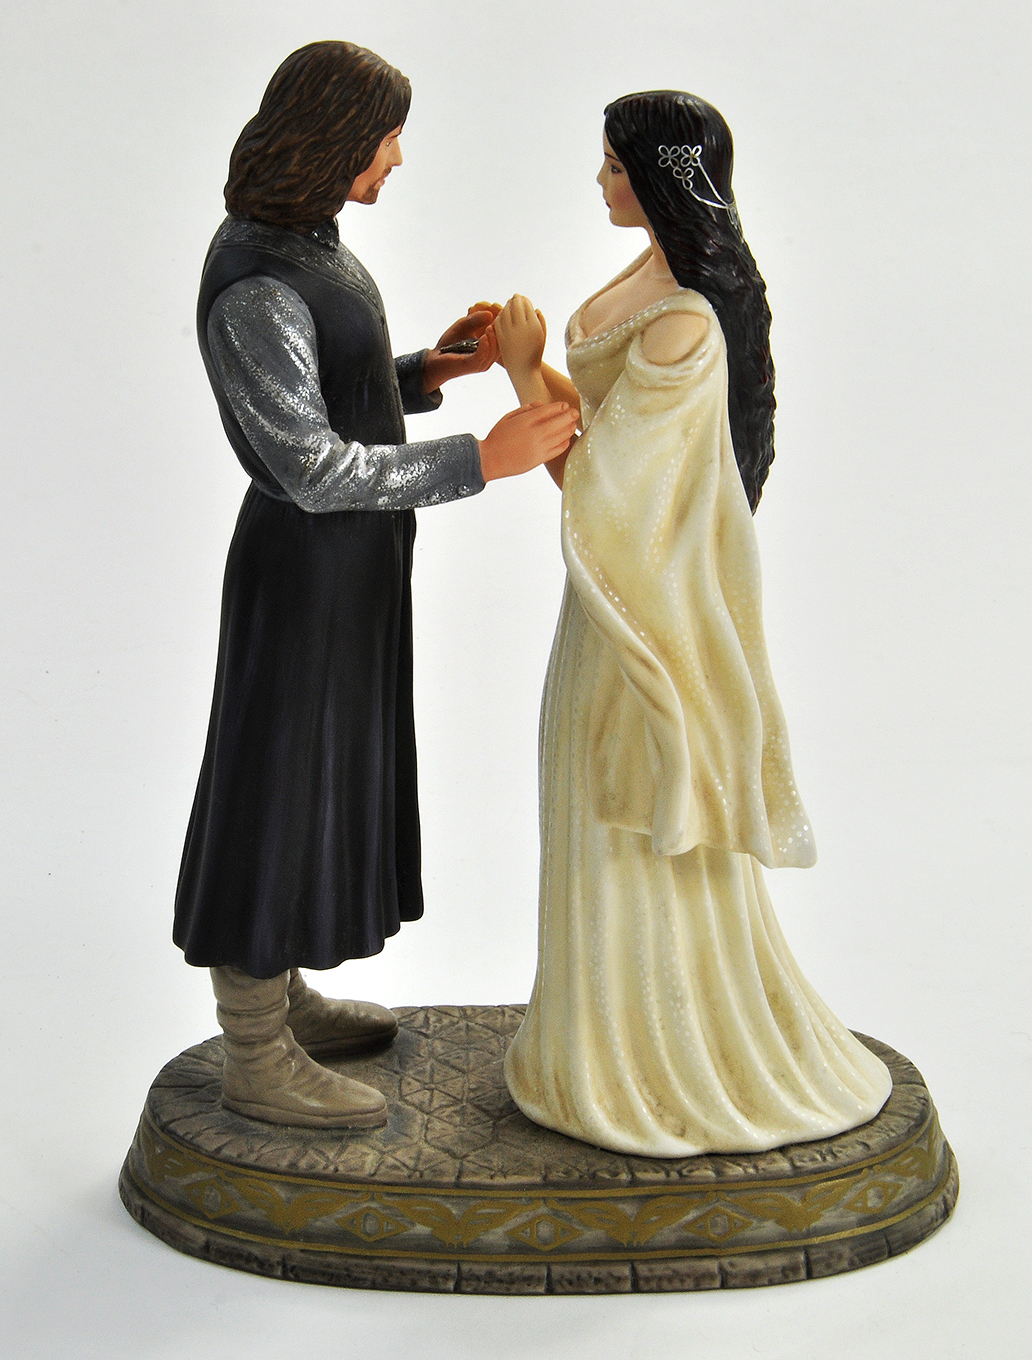 Lord of the Rings LOTR collectables comprising Noble Collection Statue - Aragorn and Arwen.